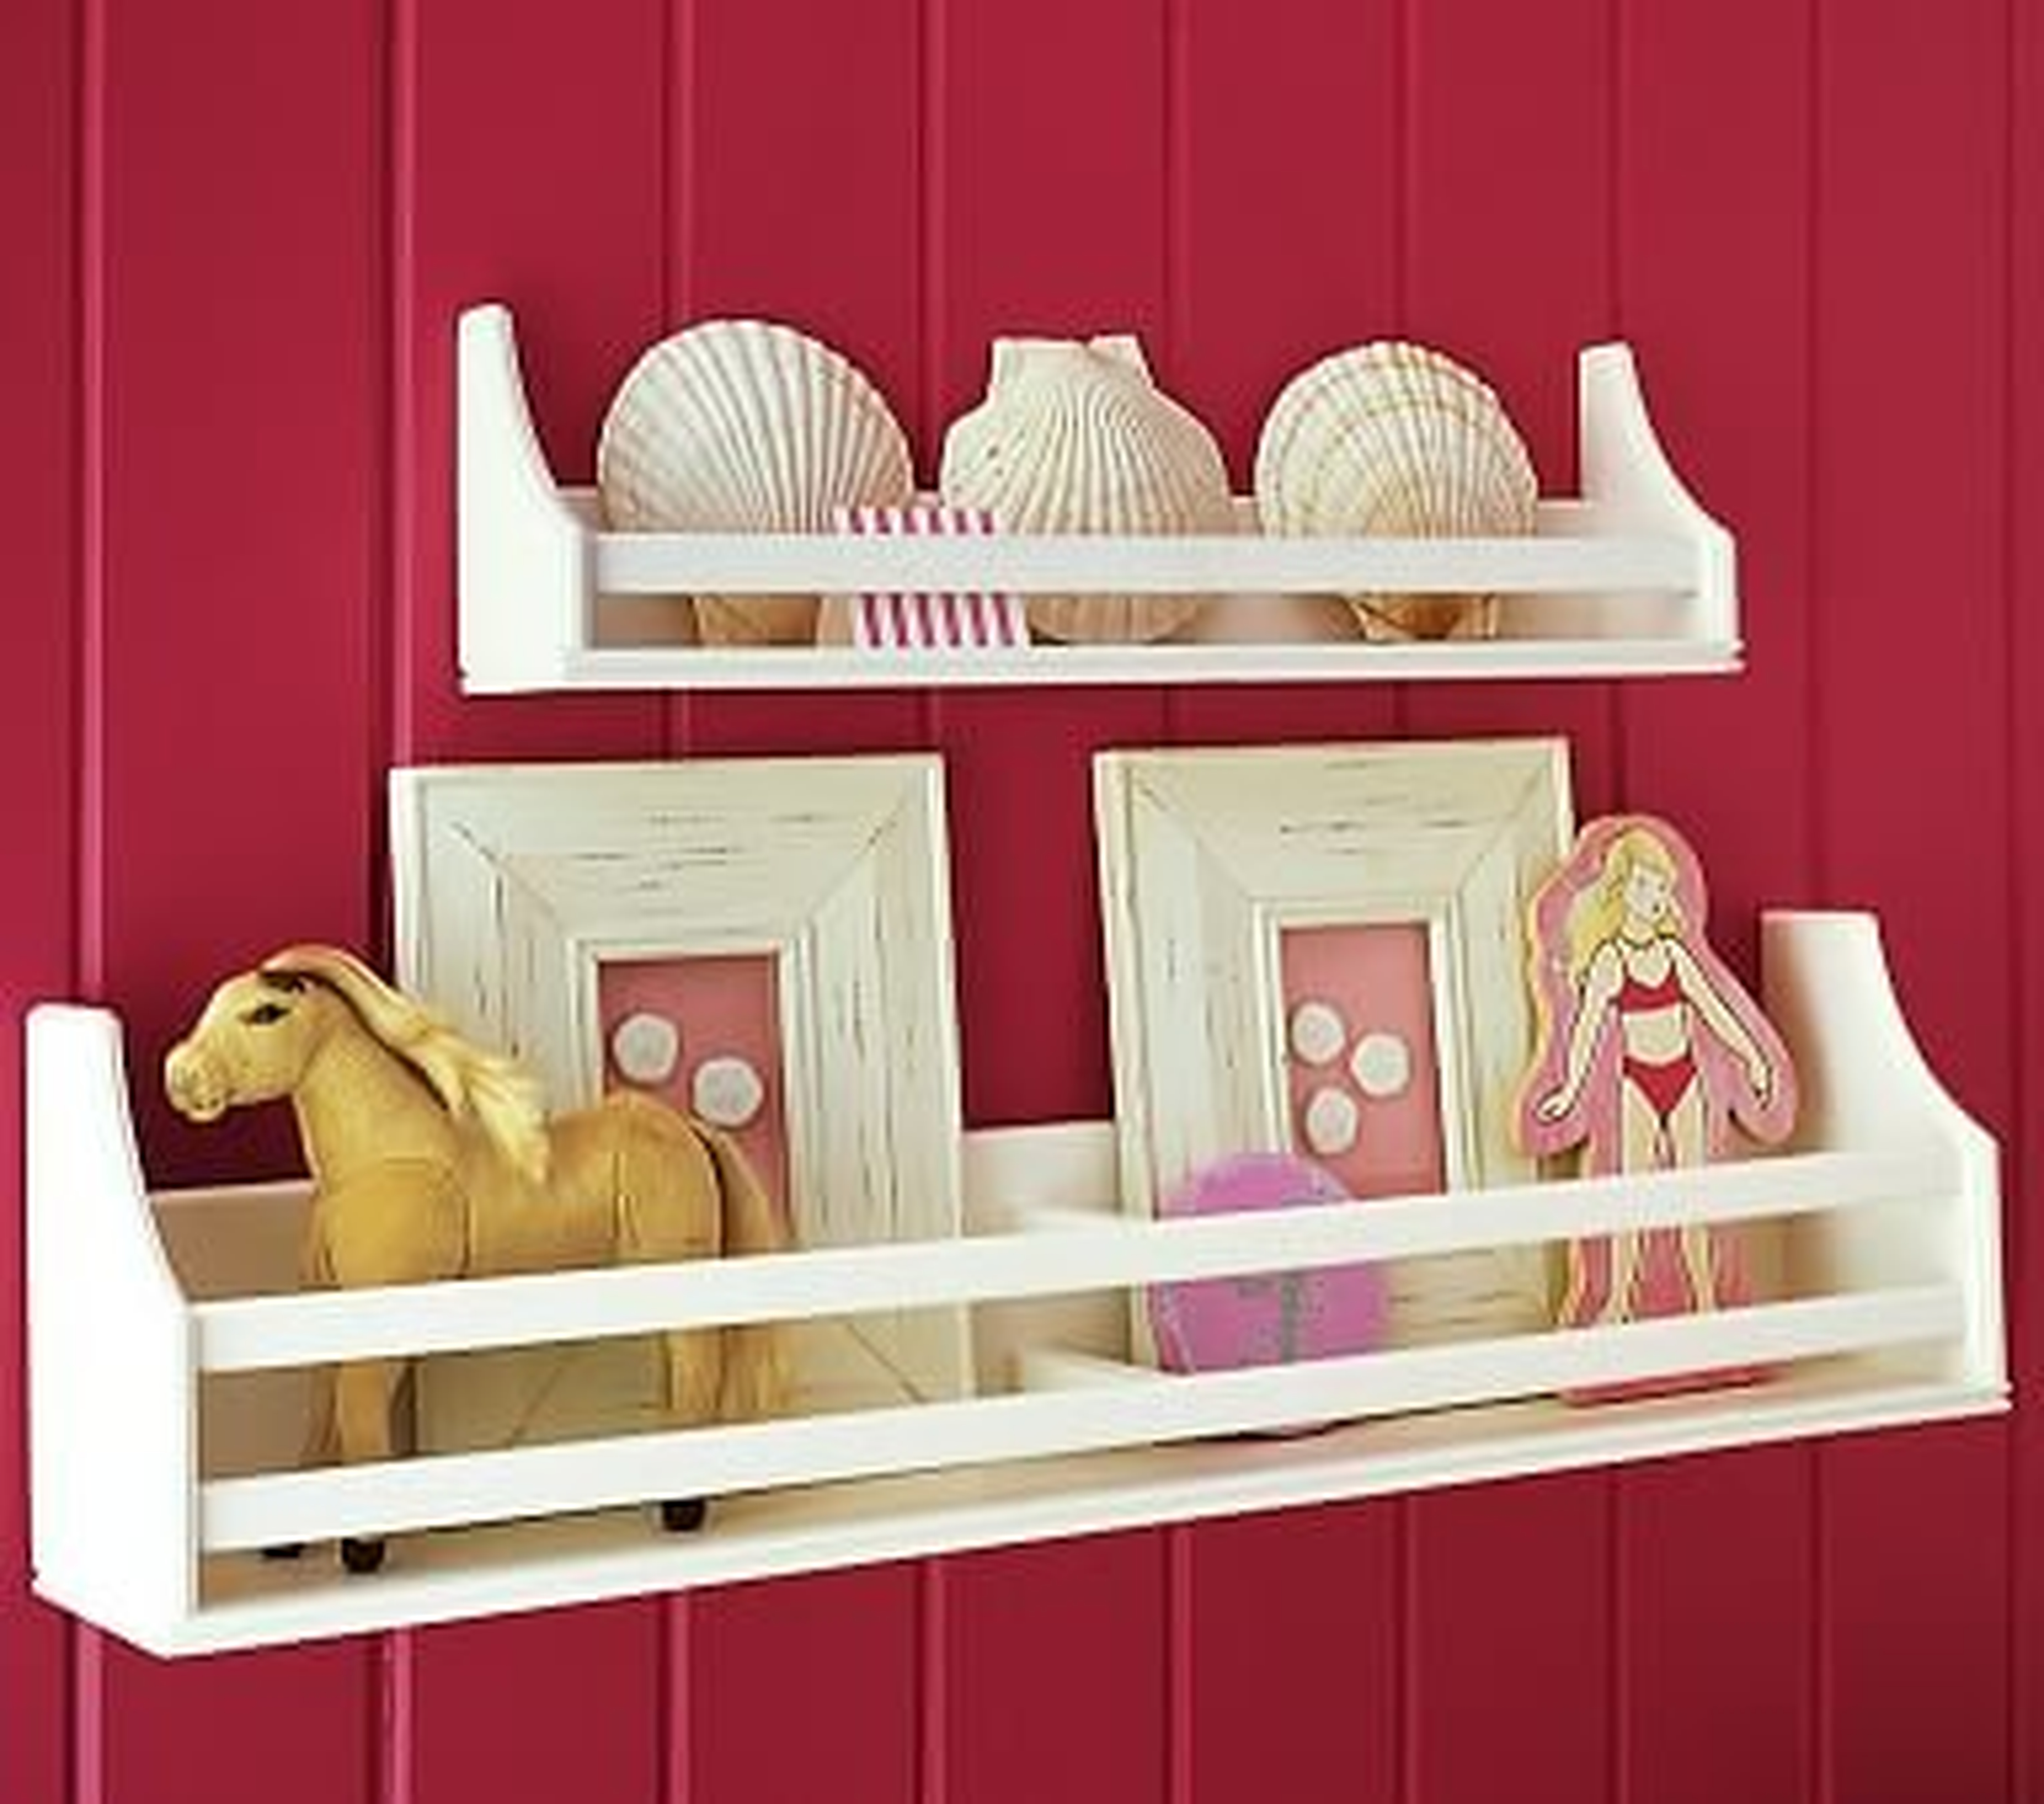 4 Inch Deep Collector's Shelf, 2 Foot x 6.5 Inch Simply White - Pottery Barn Kids